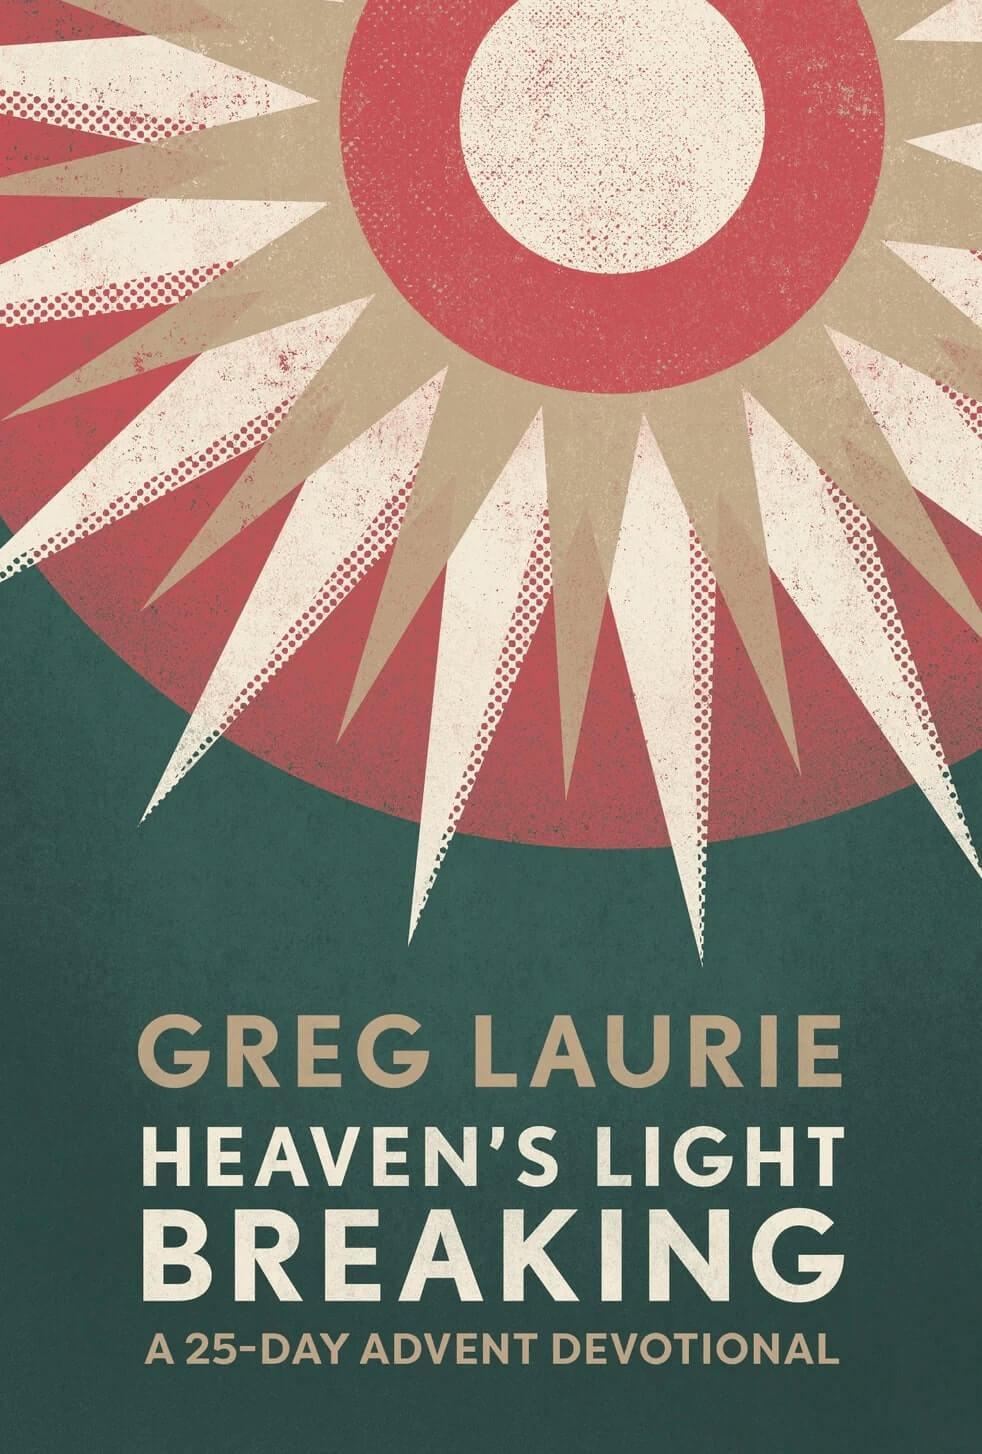 Cover of the book "Heaven's Light Breaking: A 25-Day Advent Devotional"